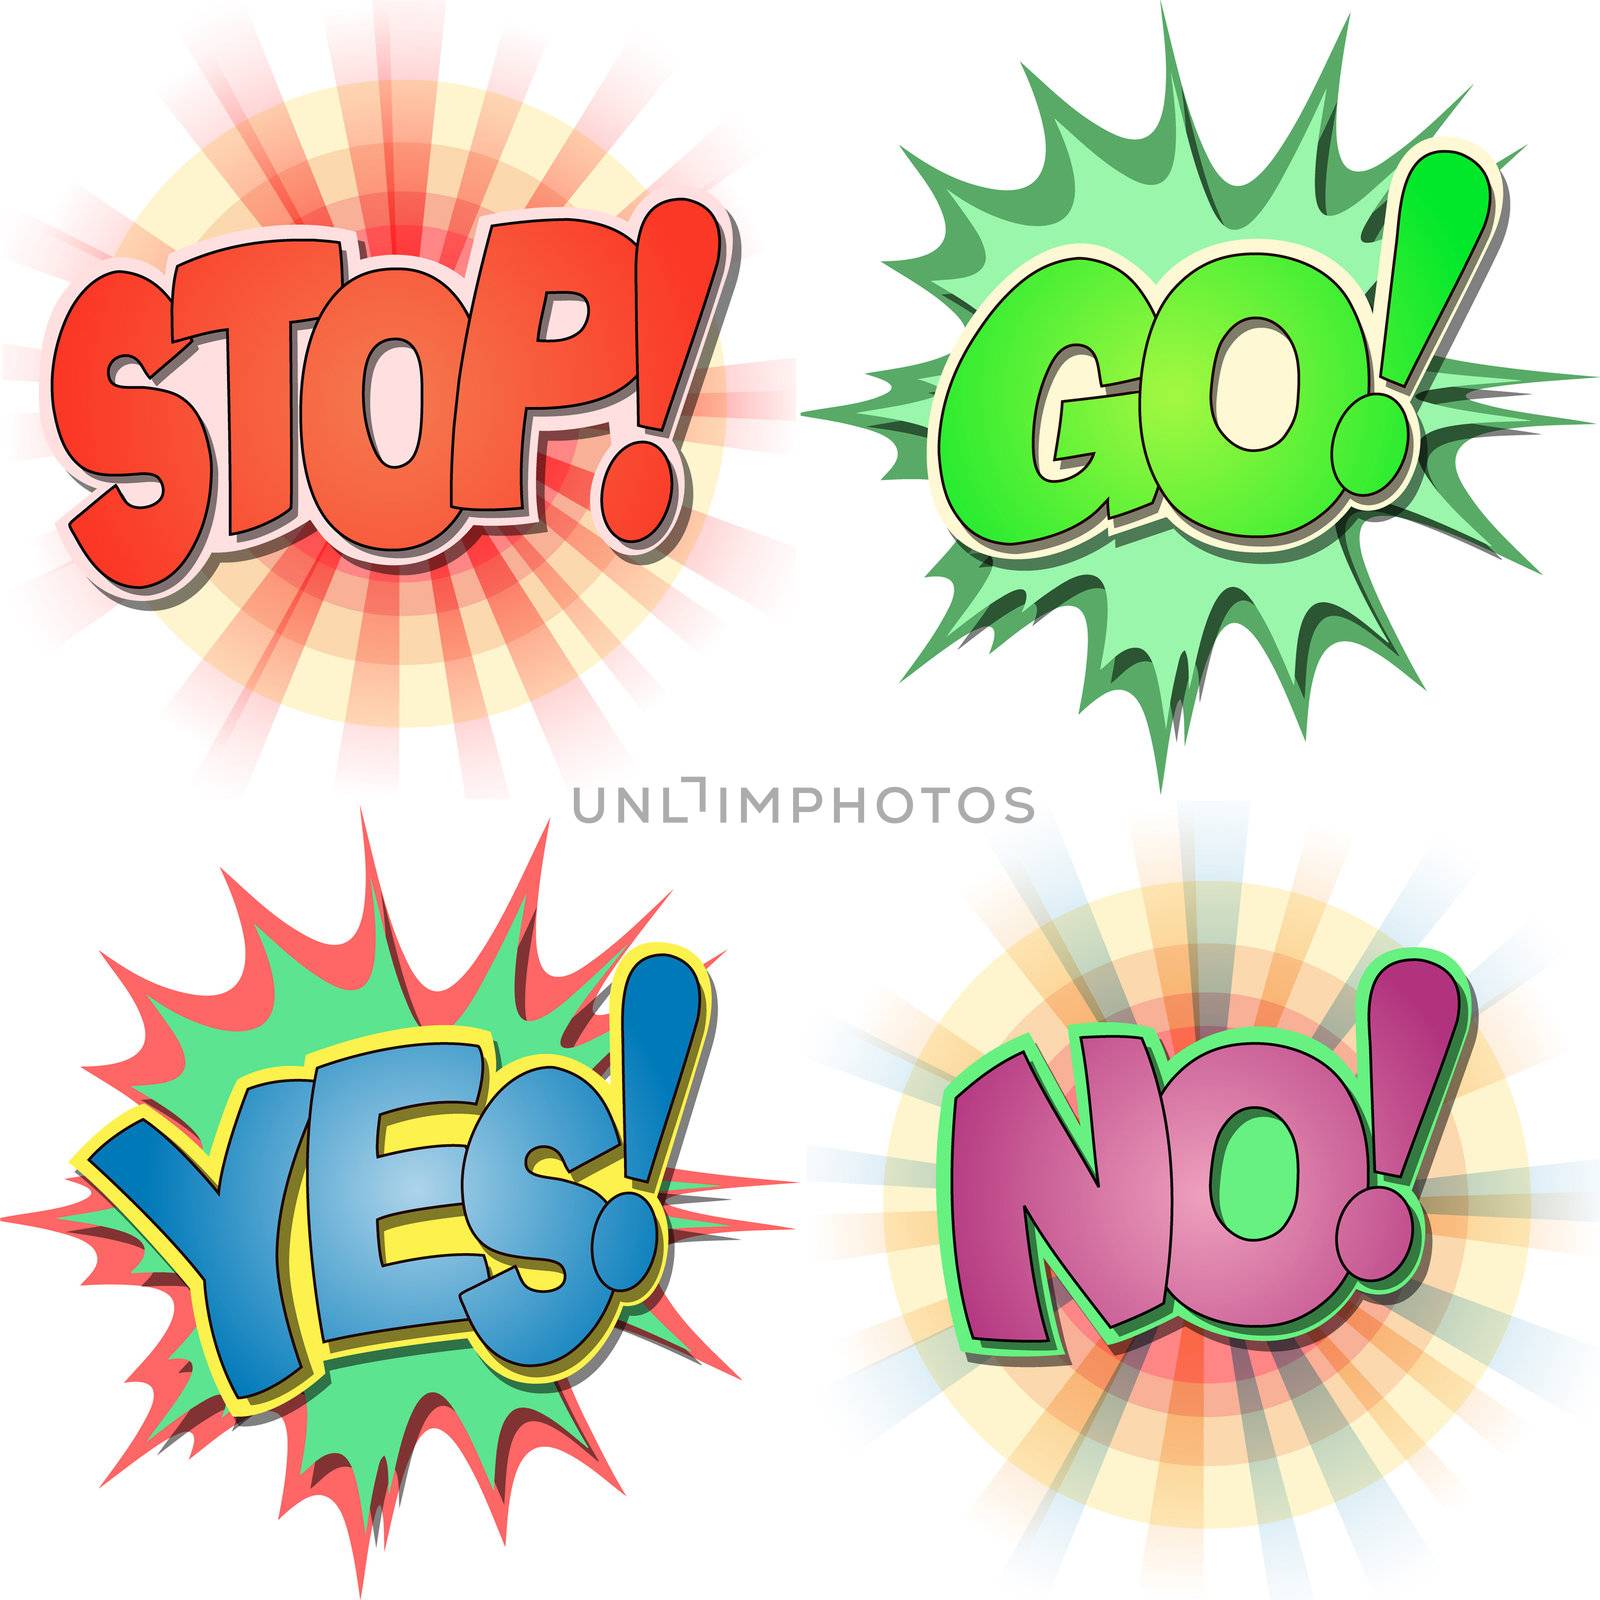 
A Selection of Comic Book Exclamations and Action Words, Stop, Go, Yes, No.